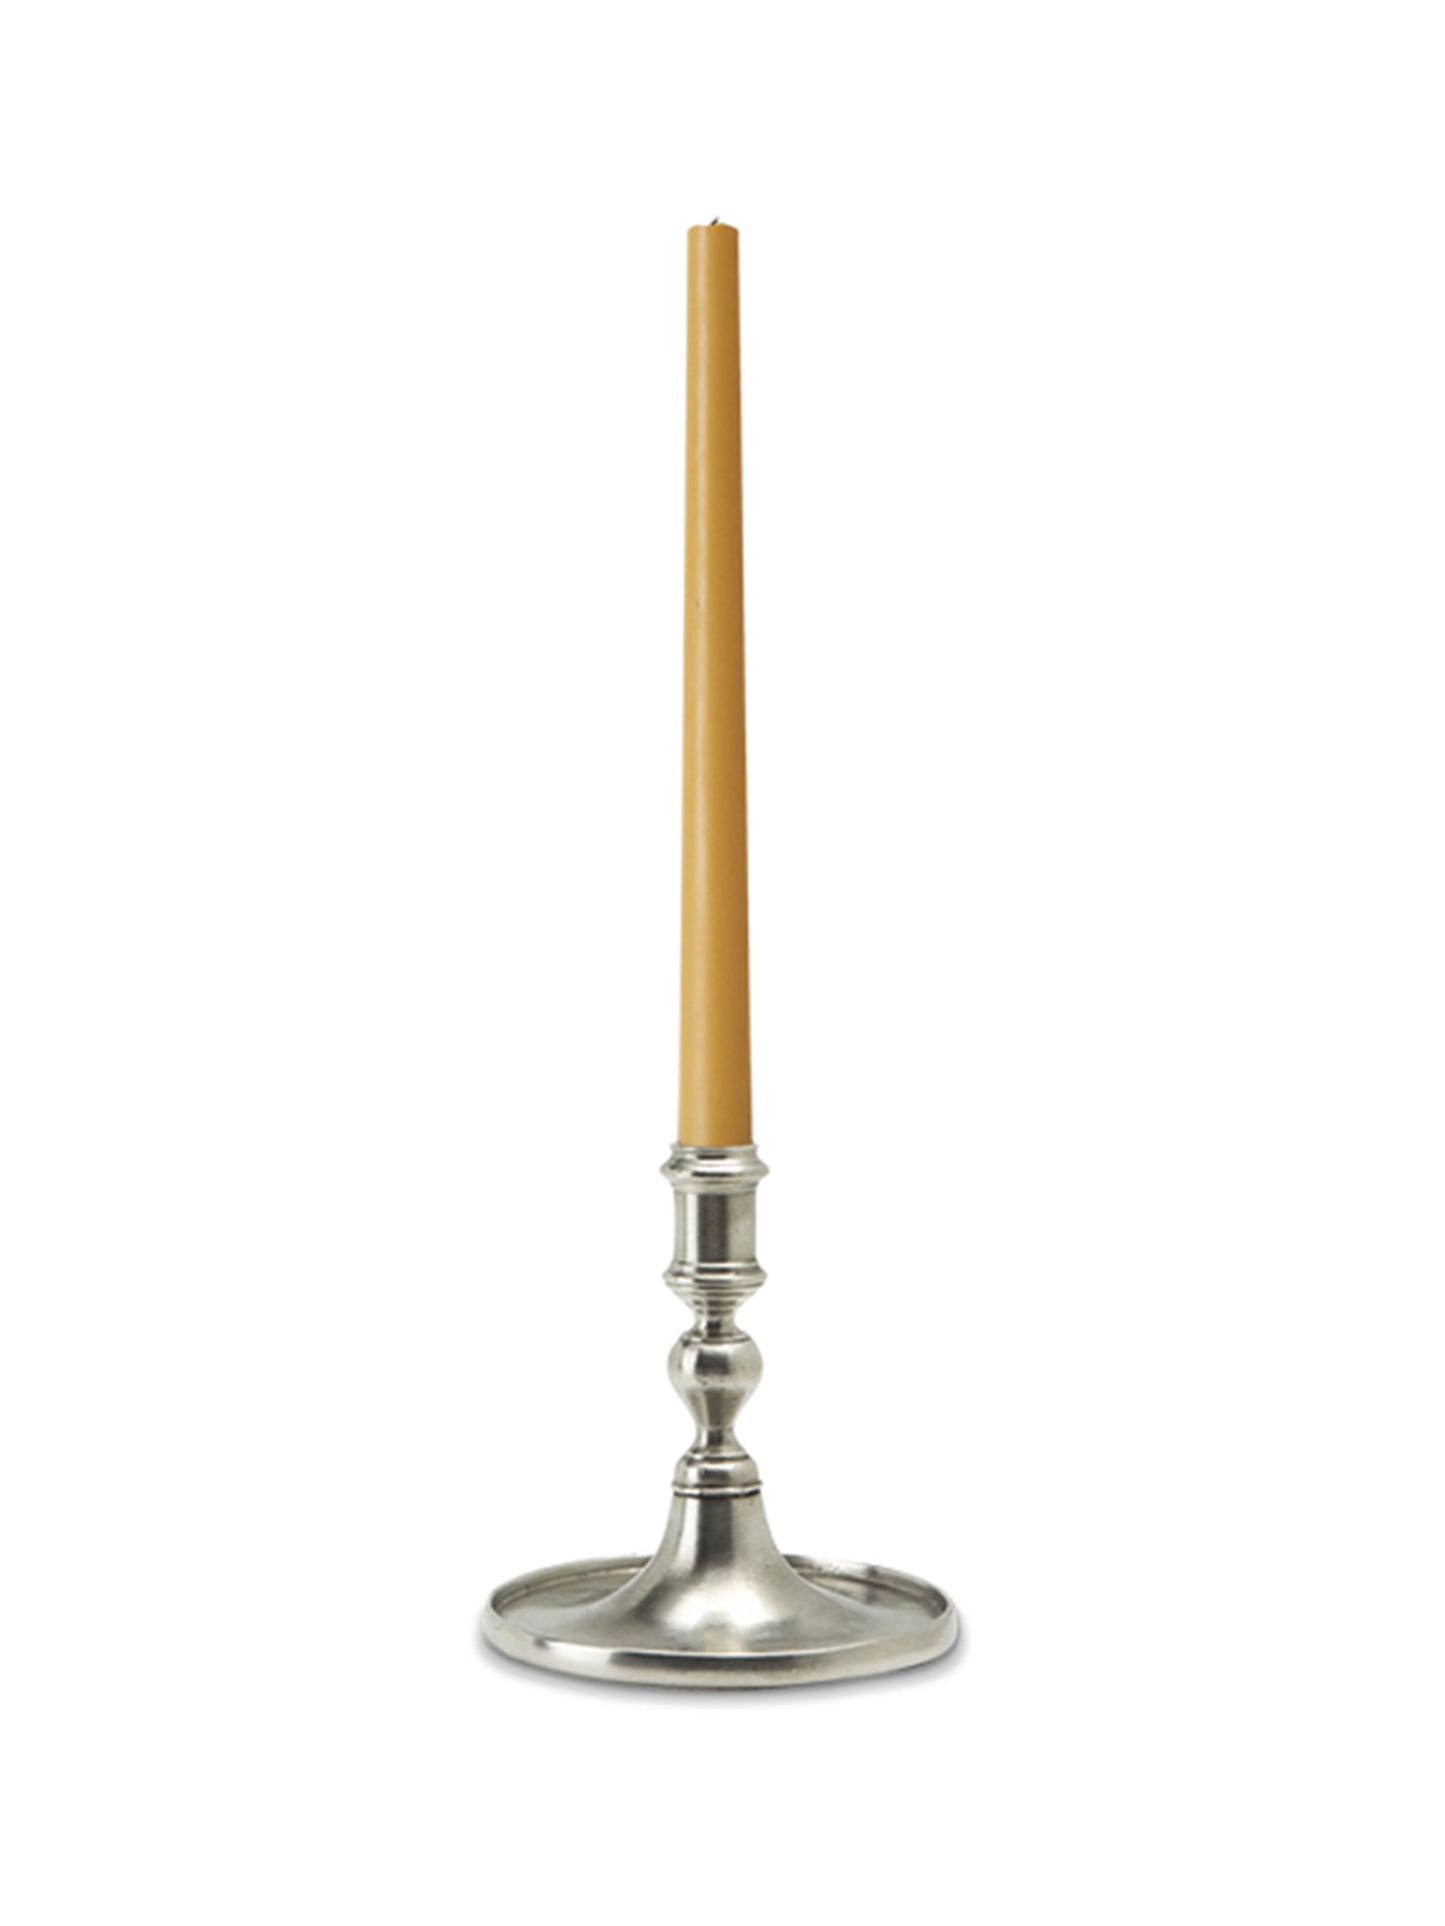 MATCH Pewter Round Based Candlestick with Rim Weston Table